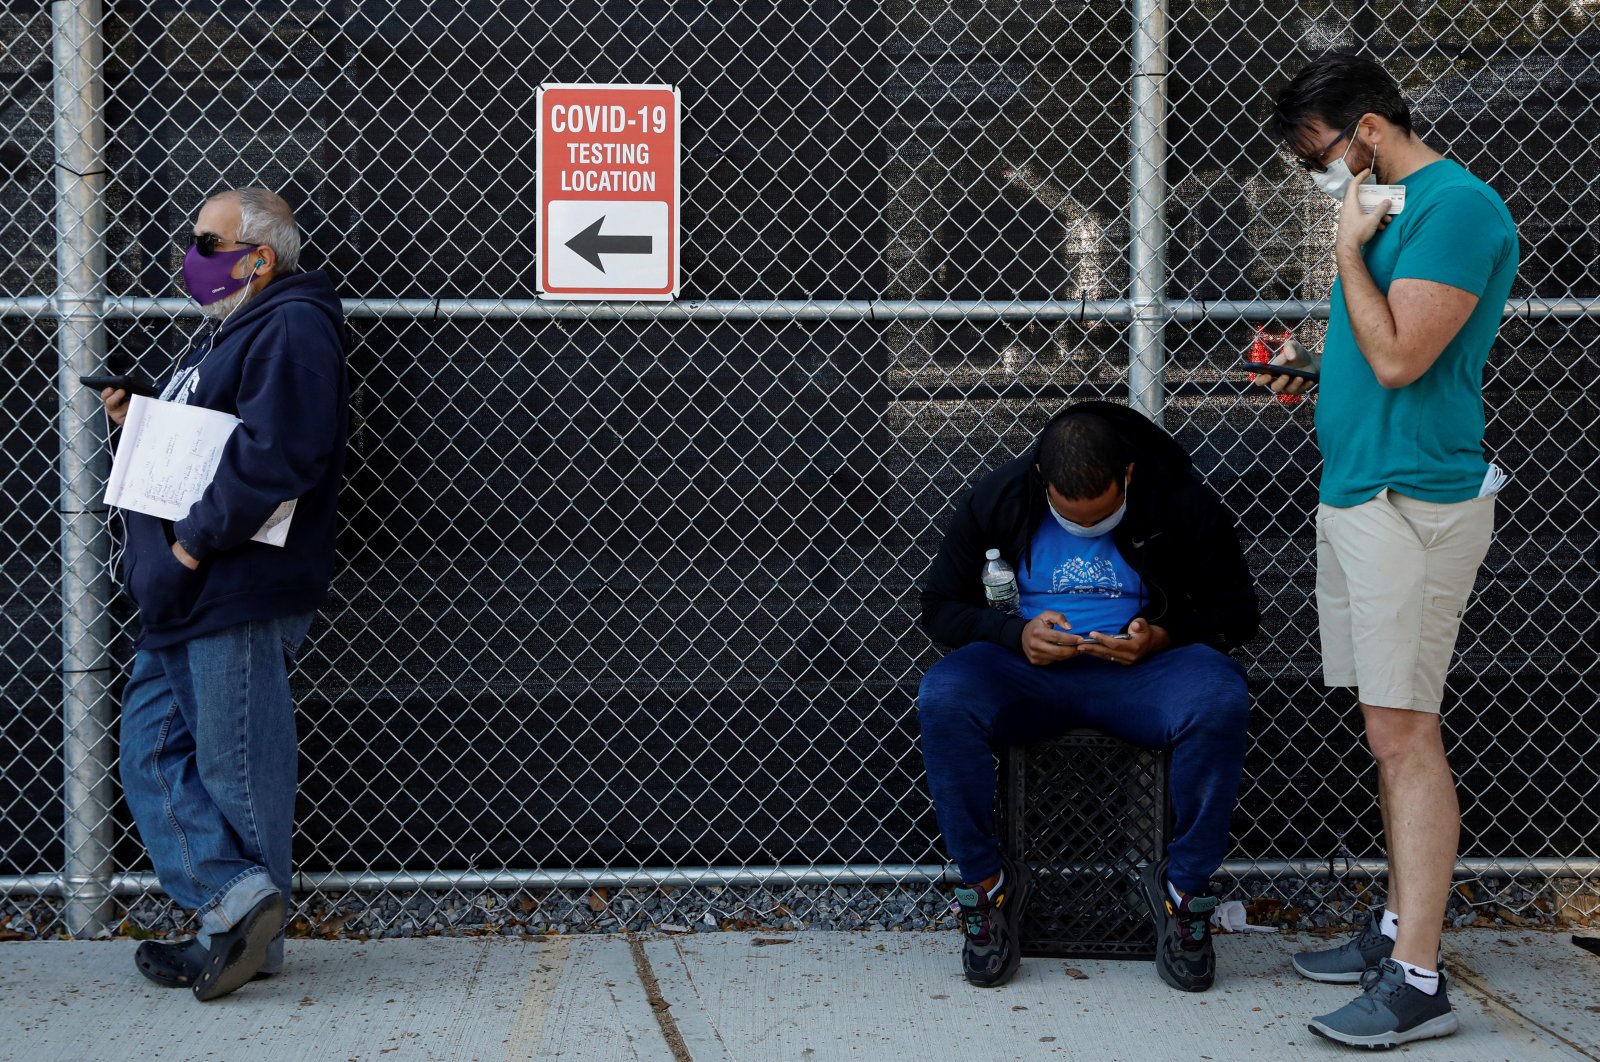 People wait in line to be tested for the coronavirus at a testing center in the Borough Park section of Brooklyn, New York City, New York, U.S., Oct. 8, 2020. (Reuters Photo)